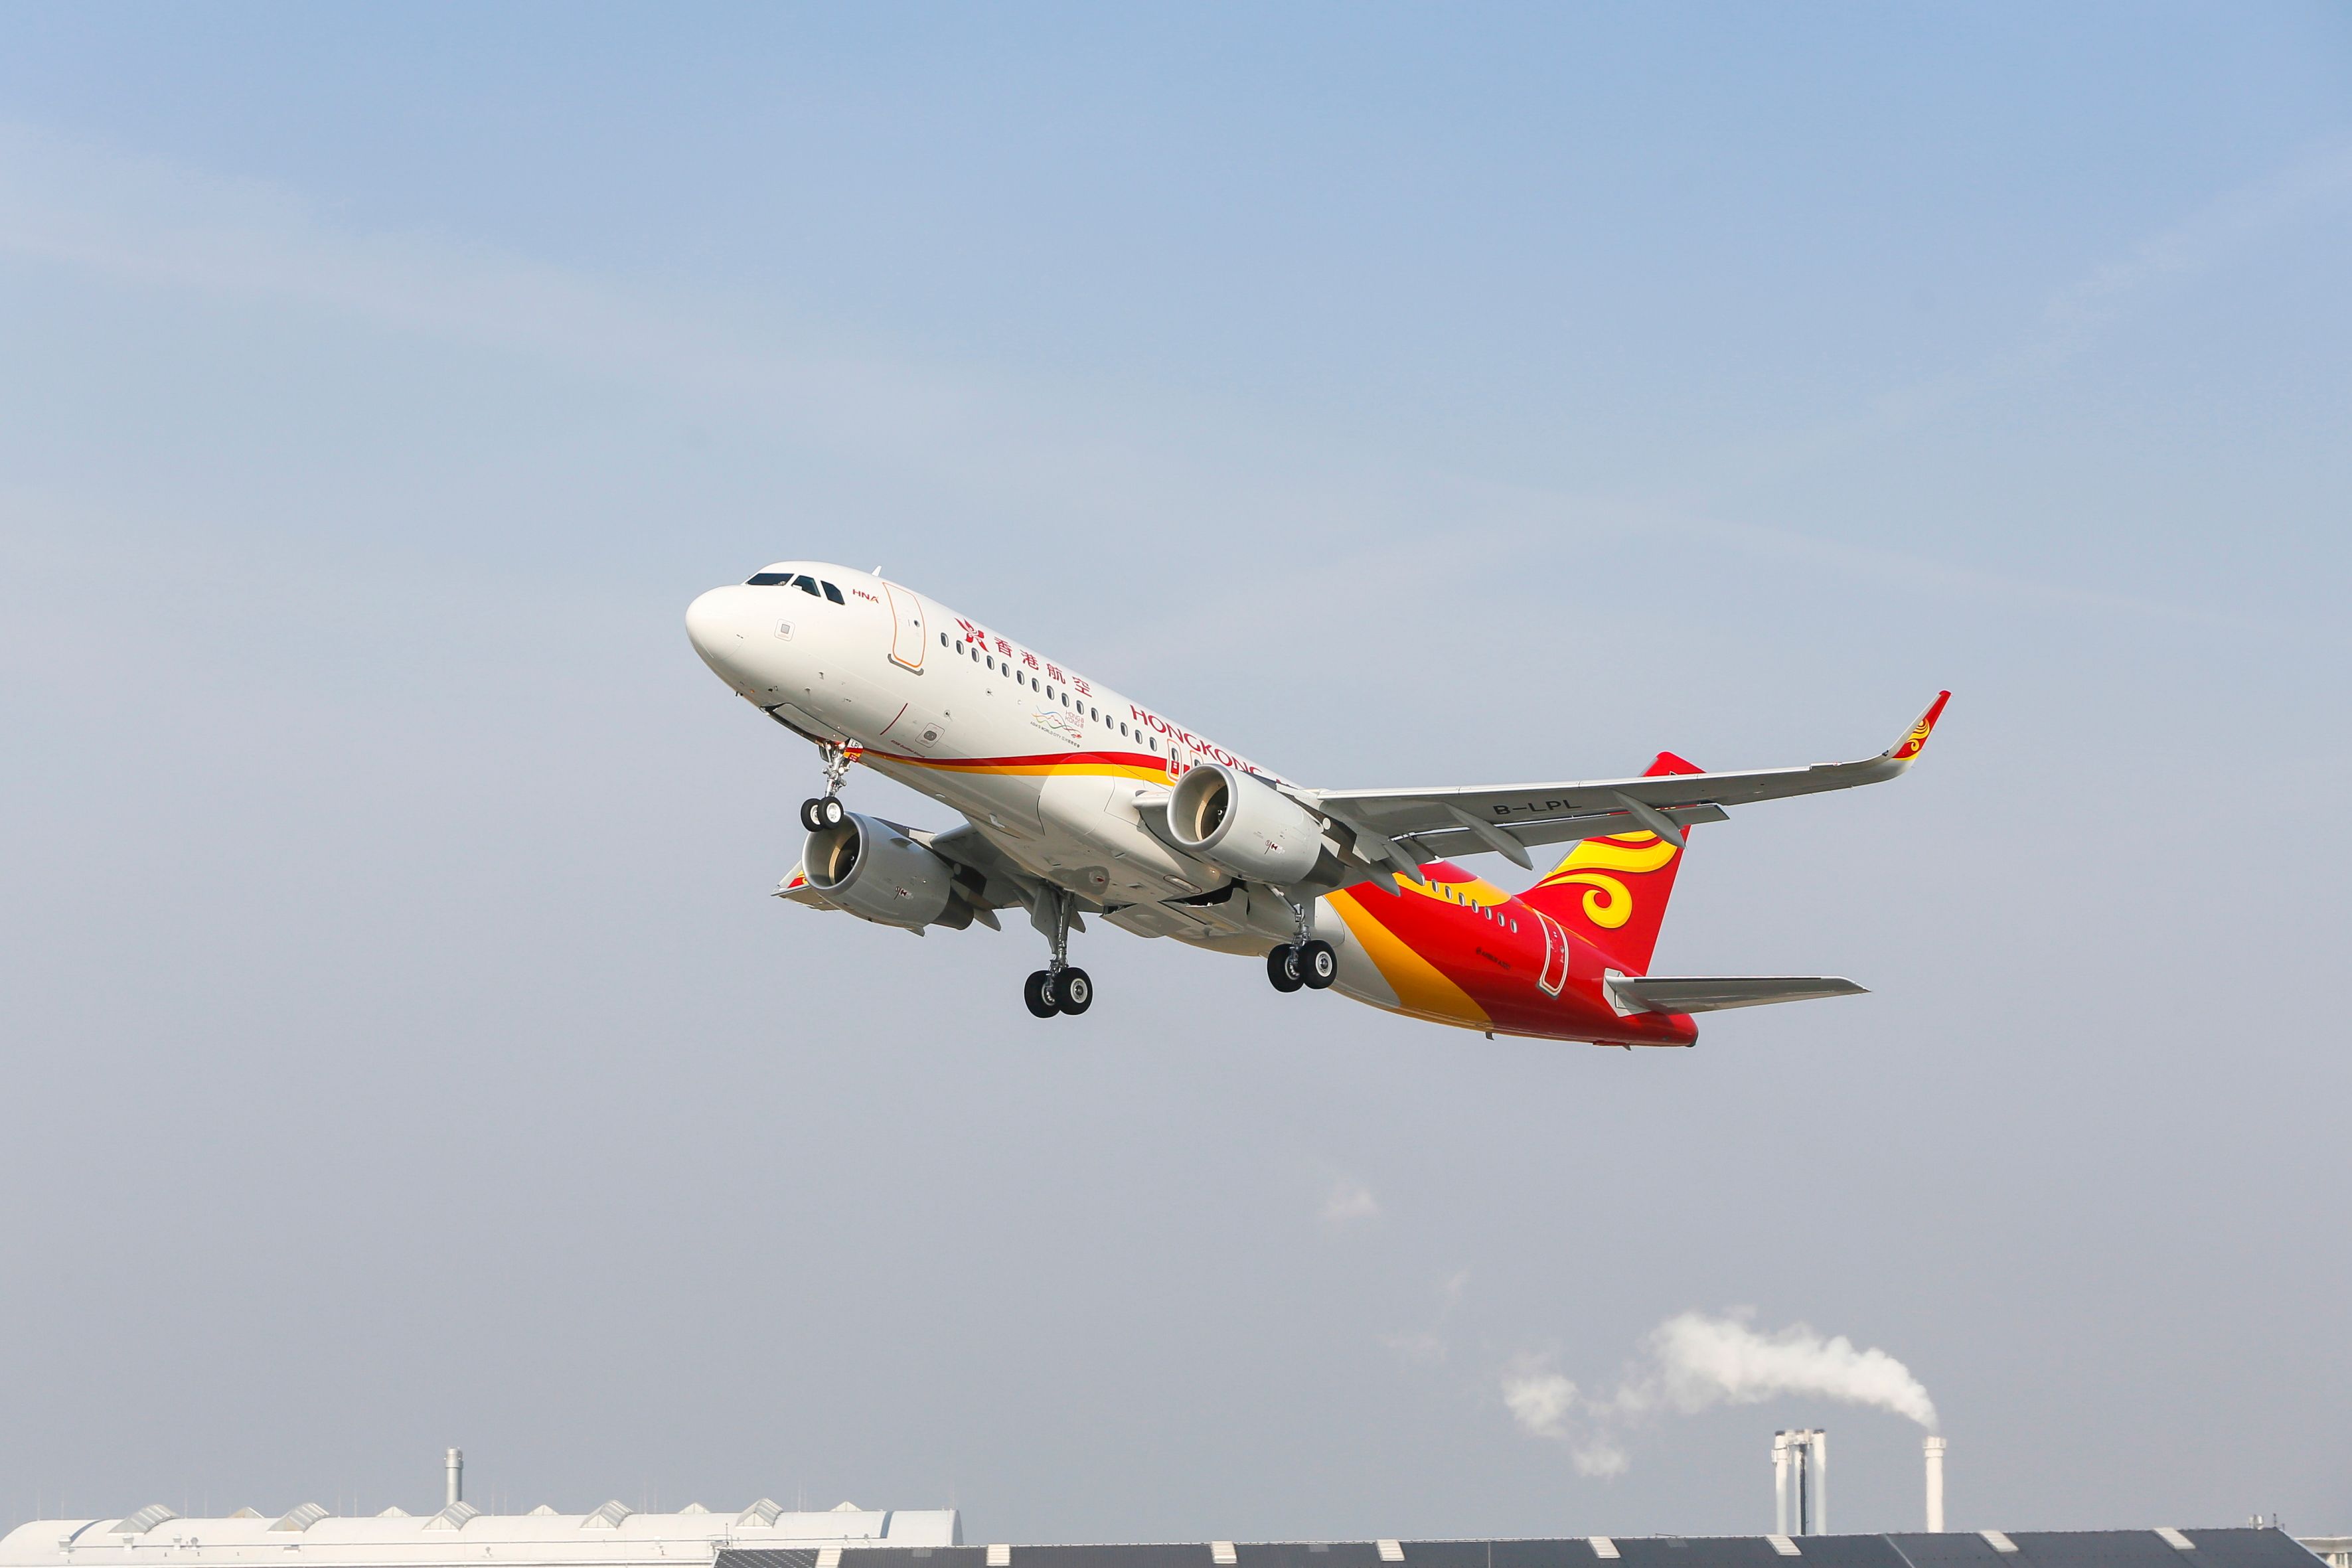 Msn 6003 Hong Kong Airlines Pc Airbus A320 Taking Off.JPG